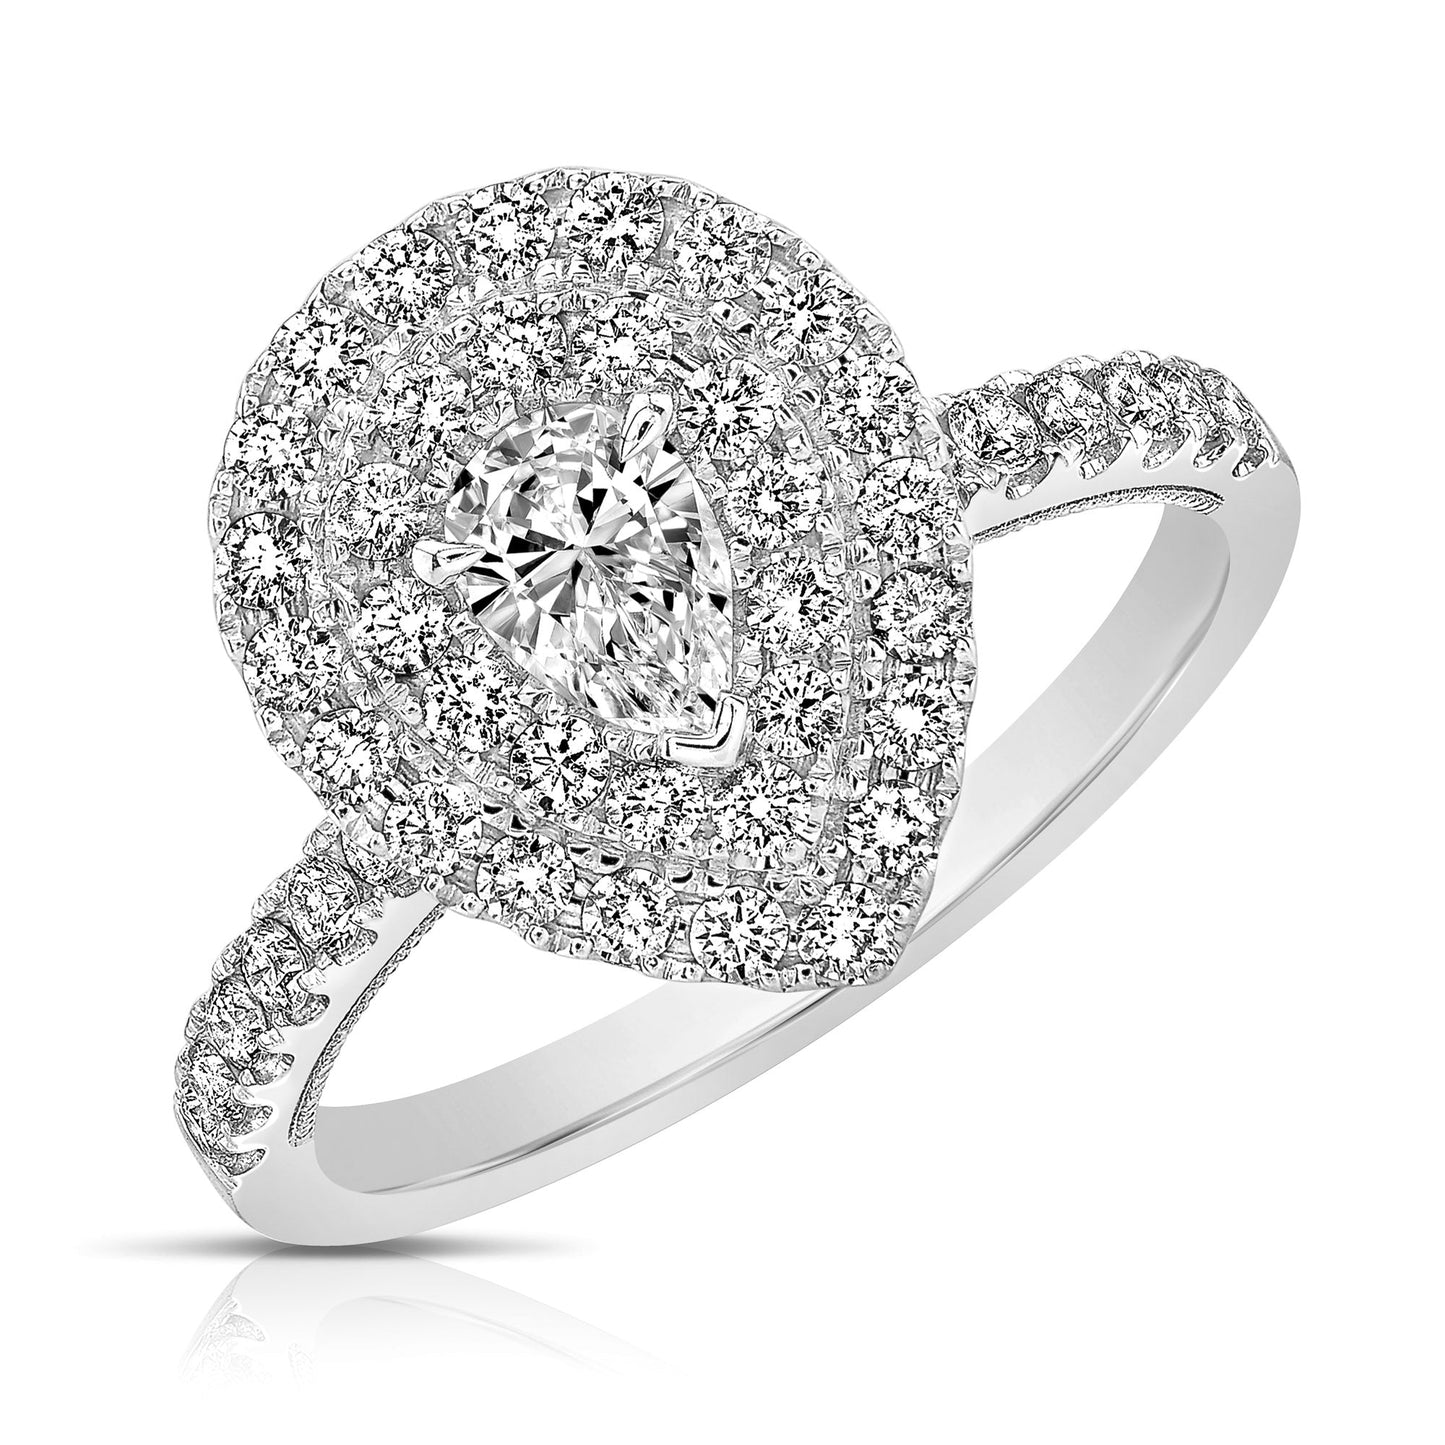 1 Ct Total Weight Double Halo Pear Shape Engagement Ring